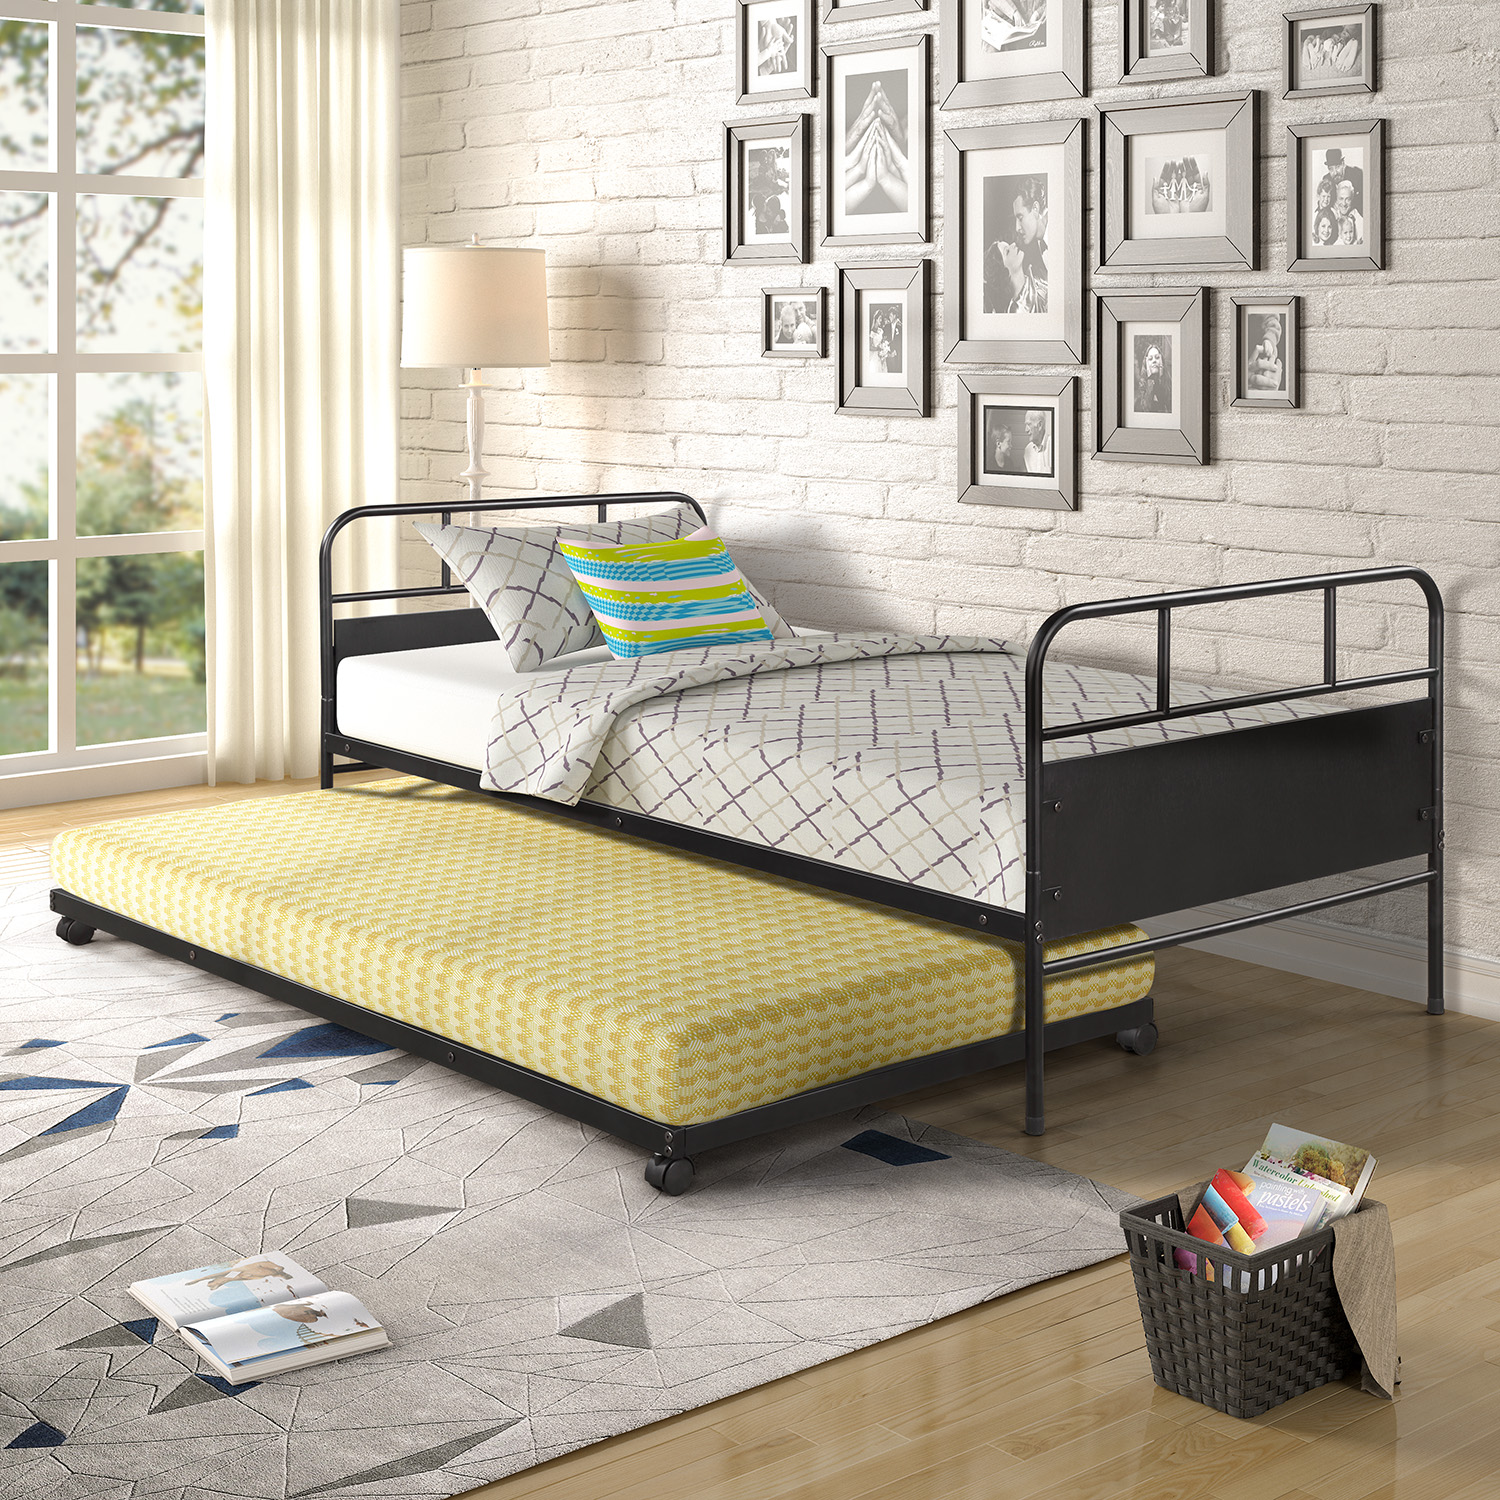 【Not allowed to sell to Walmart】Metal Daybed Platform Bed Frame with Trundle Built-in Casters, Twin Size-Boyel Living